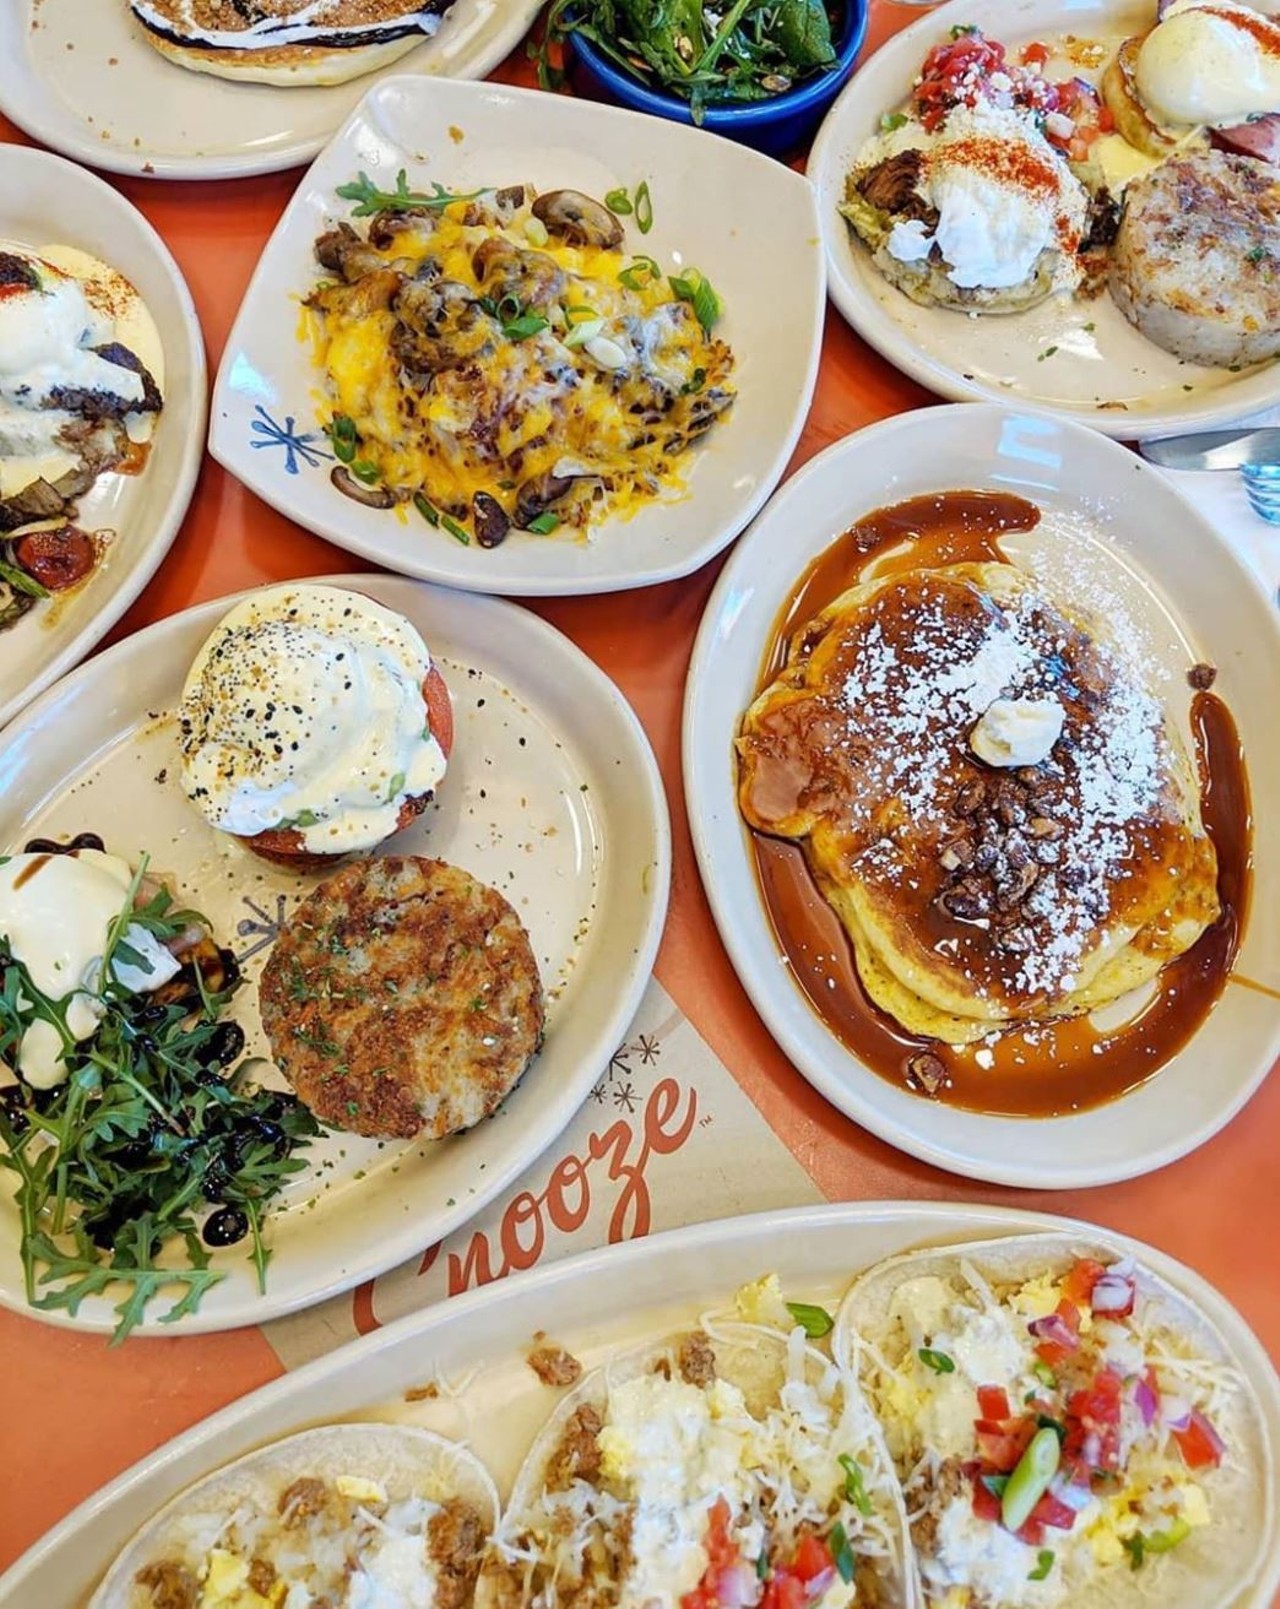 Snooze, an A.M. Eatery
11255 Huebner Rd Suite 100, (210) 962-5530, snoozeeatery.com
We know what you’re thinking – hey! Snooze isn’t *that* new, and it definitely didn’t just open this month. We know, but the newest San Antonio location just did. Which is good, because as anyone who has tried the other Snooze locations knows, they’re really popular. We need more! What can we say?
Photo via Instagram / snoozeameatery